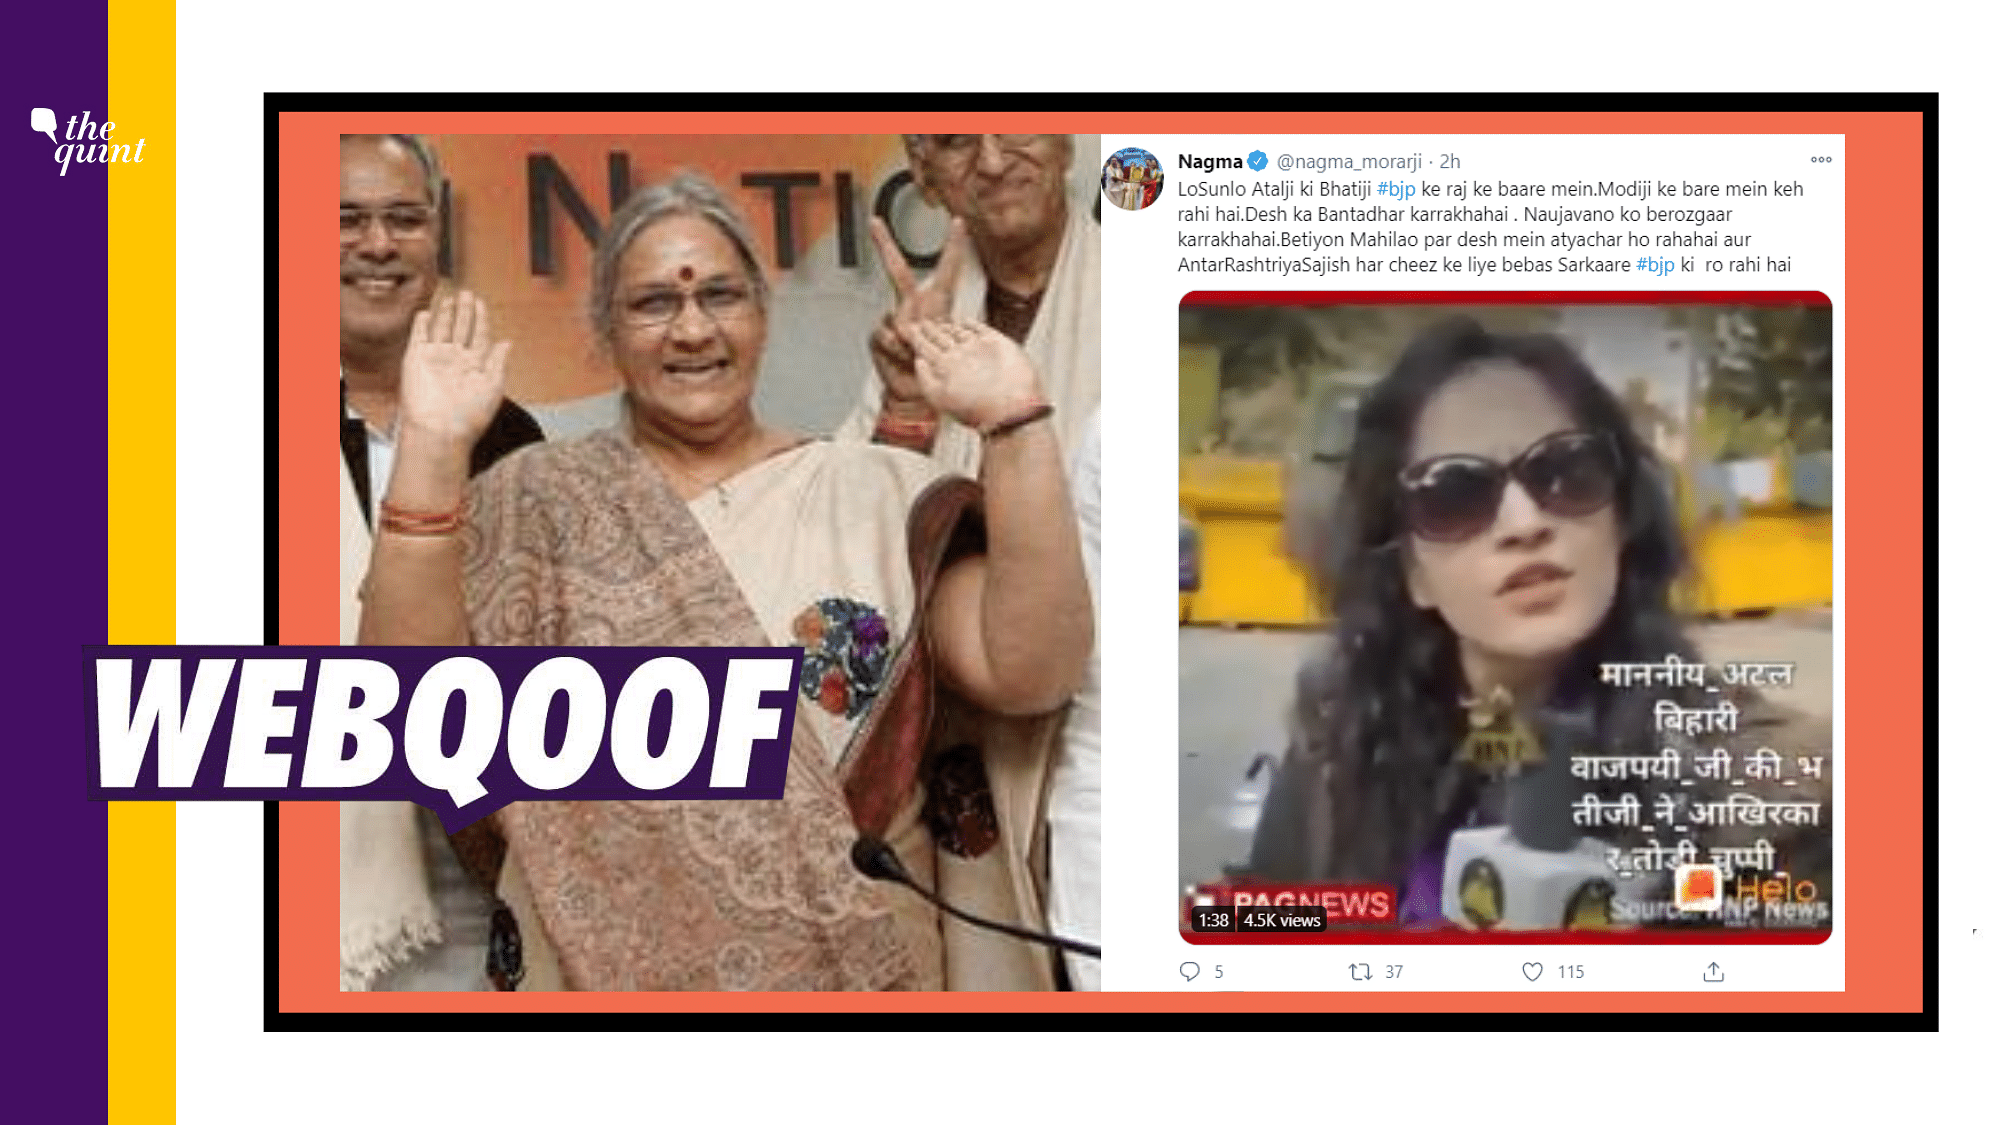 A video of a woman criticising the government for a ‘news channel’ has gone viral with the claim that she’s former Prime Minister Atal Bihari Vajpayee’s neice.